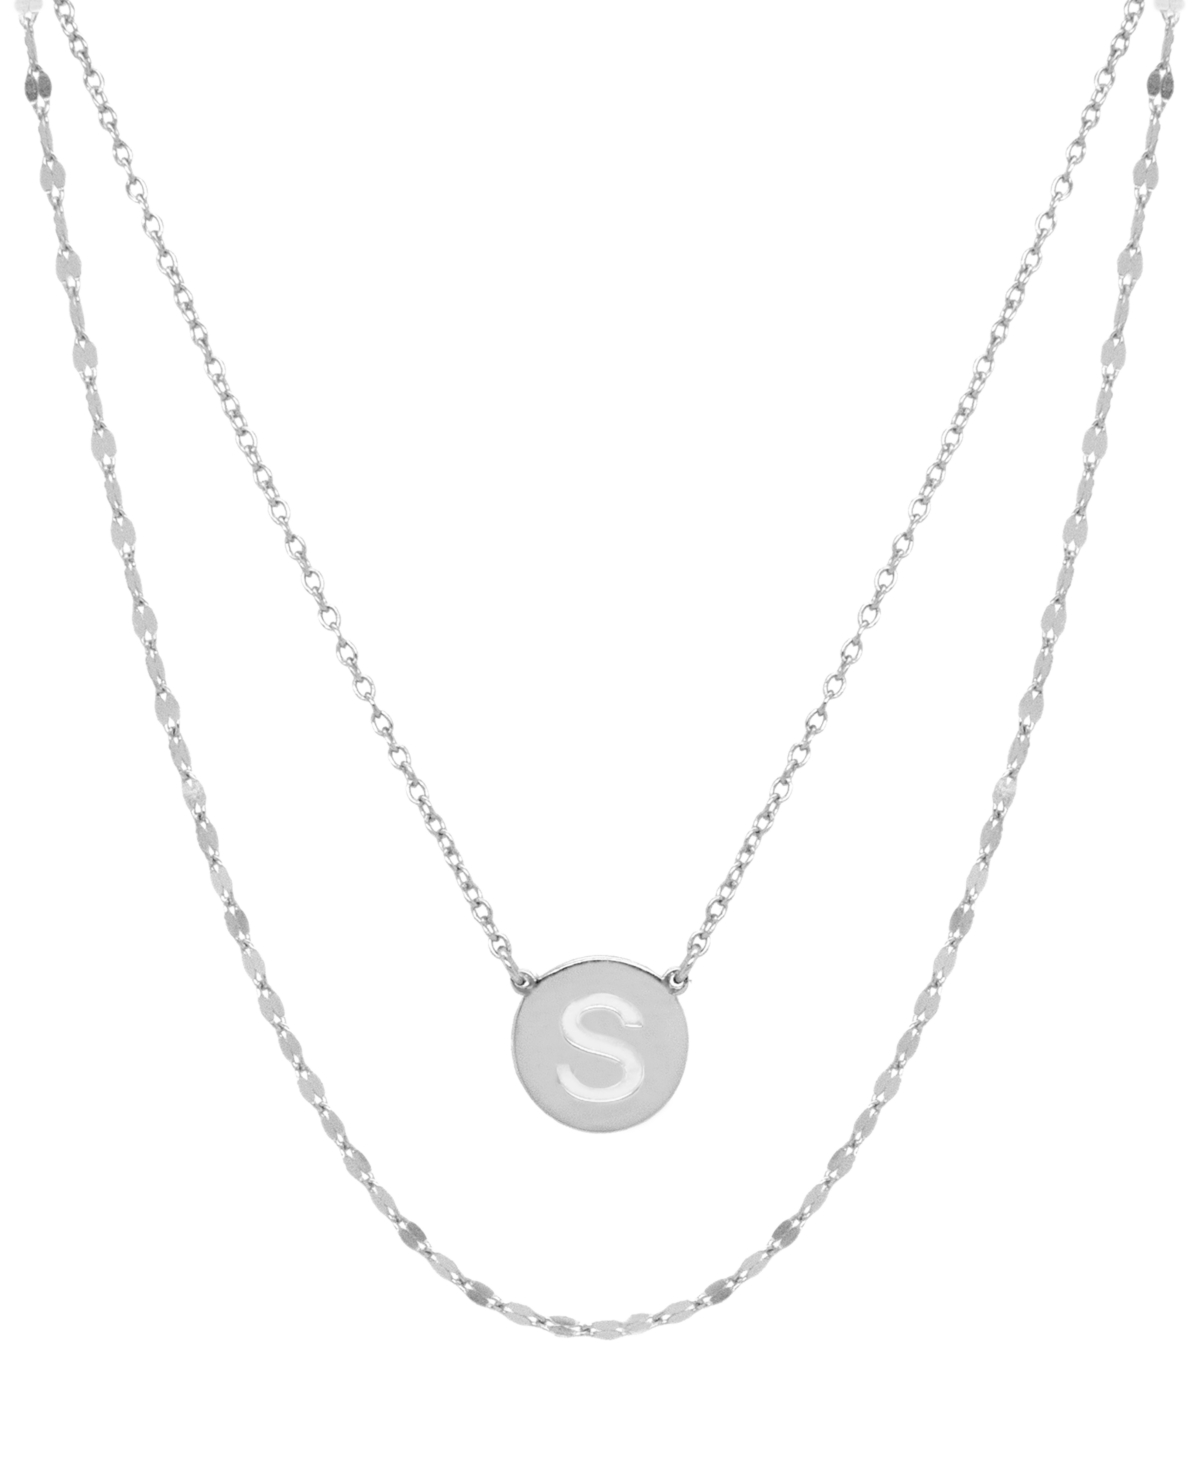 Initial Disc Layered Pendant Necklace in Sterling Silver, Created for Macy's - S